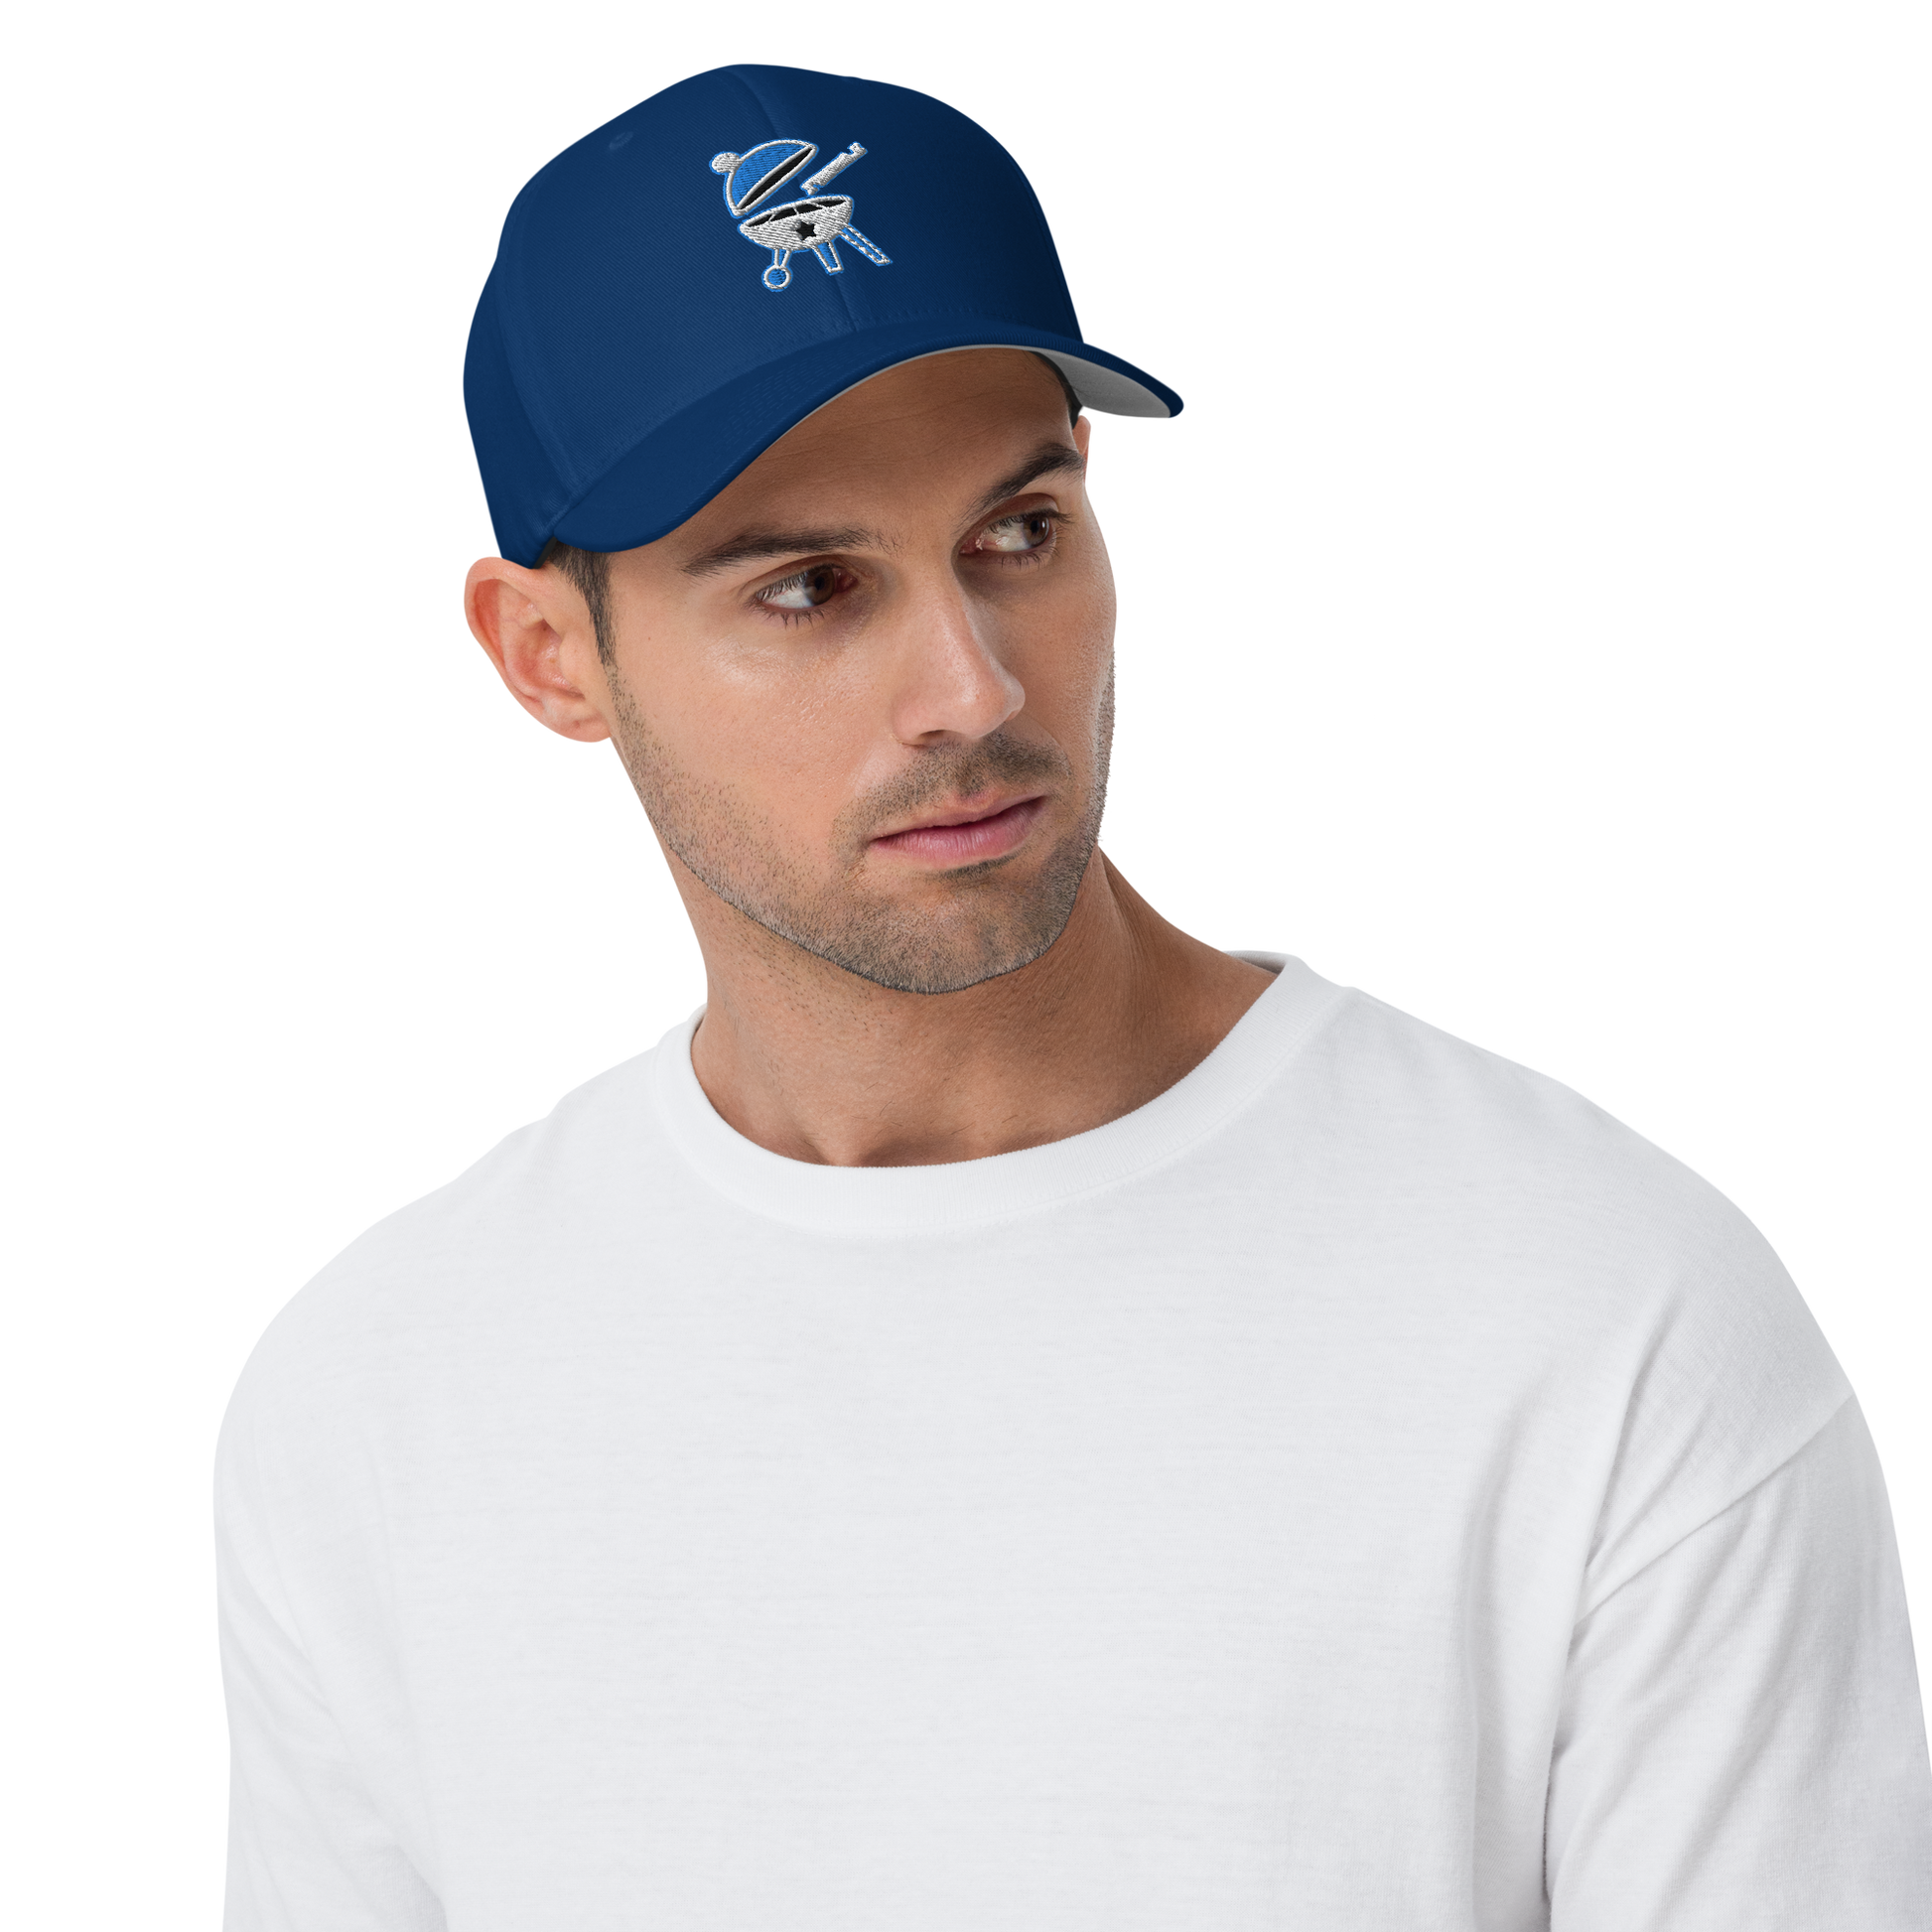 Man wearing blue BBQ Pic hat. Blue baseball cap with the BBQ Pic logo on it which is a round, open BBQ with a BBQ Pic about to clean it.